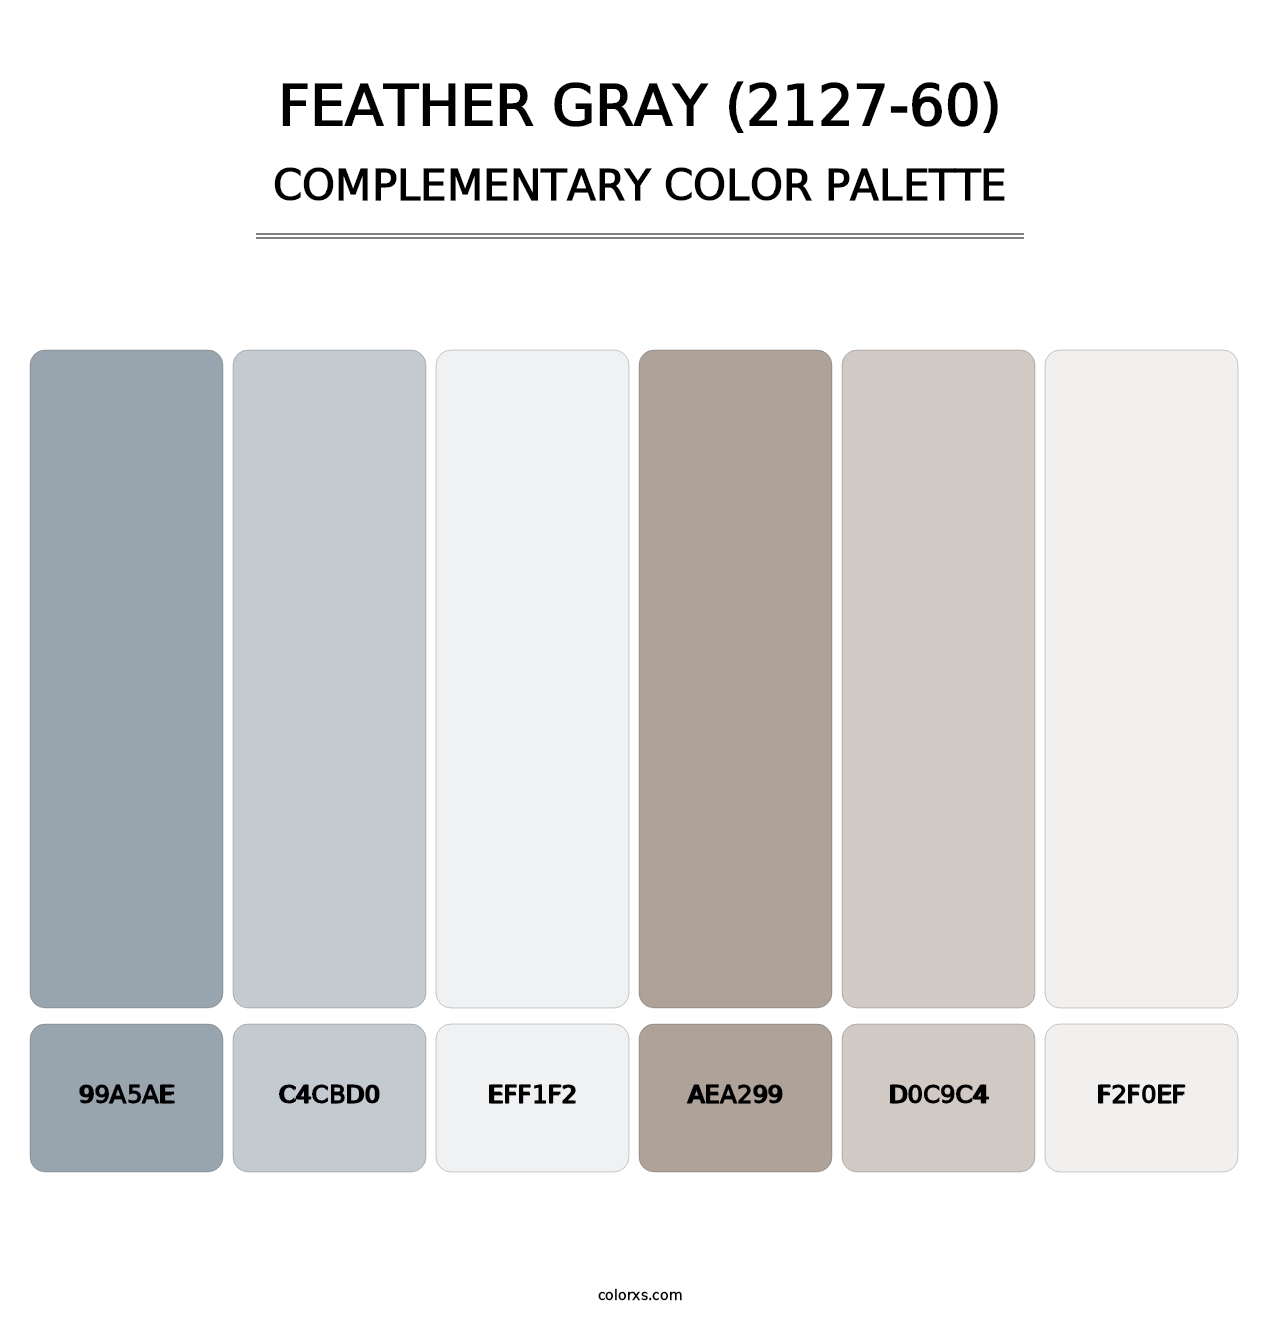 Feather Gray (2127-60) - Complementary Color Palette